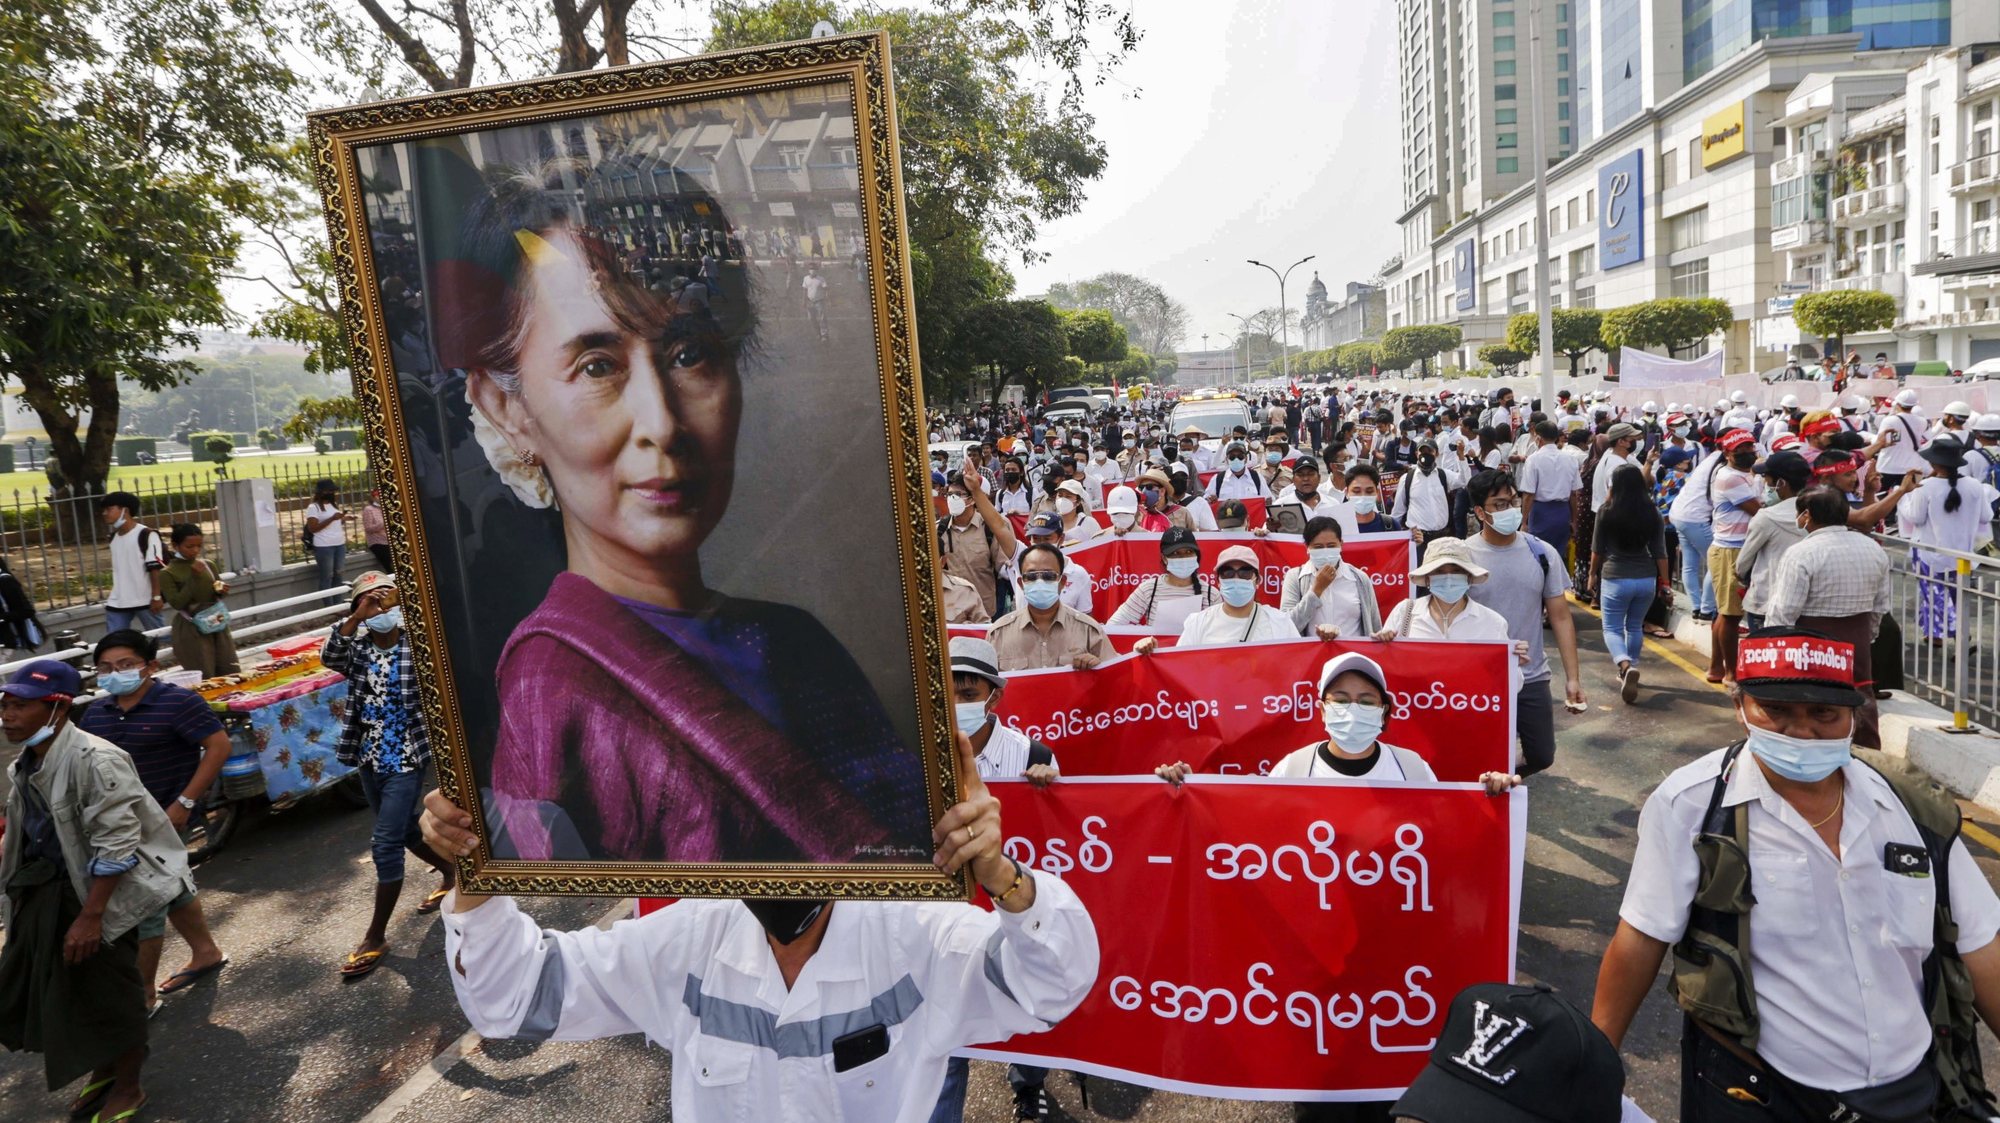 epaselect epa09029004 Demonstrators hold a portrait of detained civilian leader Aung San Suu Kyi during a protest against the military coup, in Yangon, Myanmar, 22 February 2021. Businesses closed and thousands of anti-coup demonstrators took to the streets for a nationwide general strike dubbed the &#039;22222&#039; or &#039;Five Twos&#039; uprising, in reference to the date, 22 February 2021, despite the military junta warned of lethal force.  EPA/LYNN BO BO